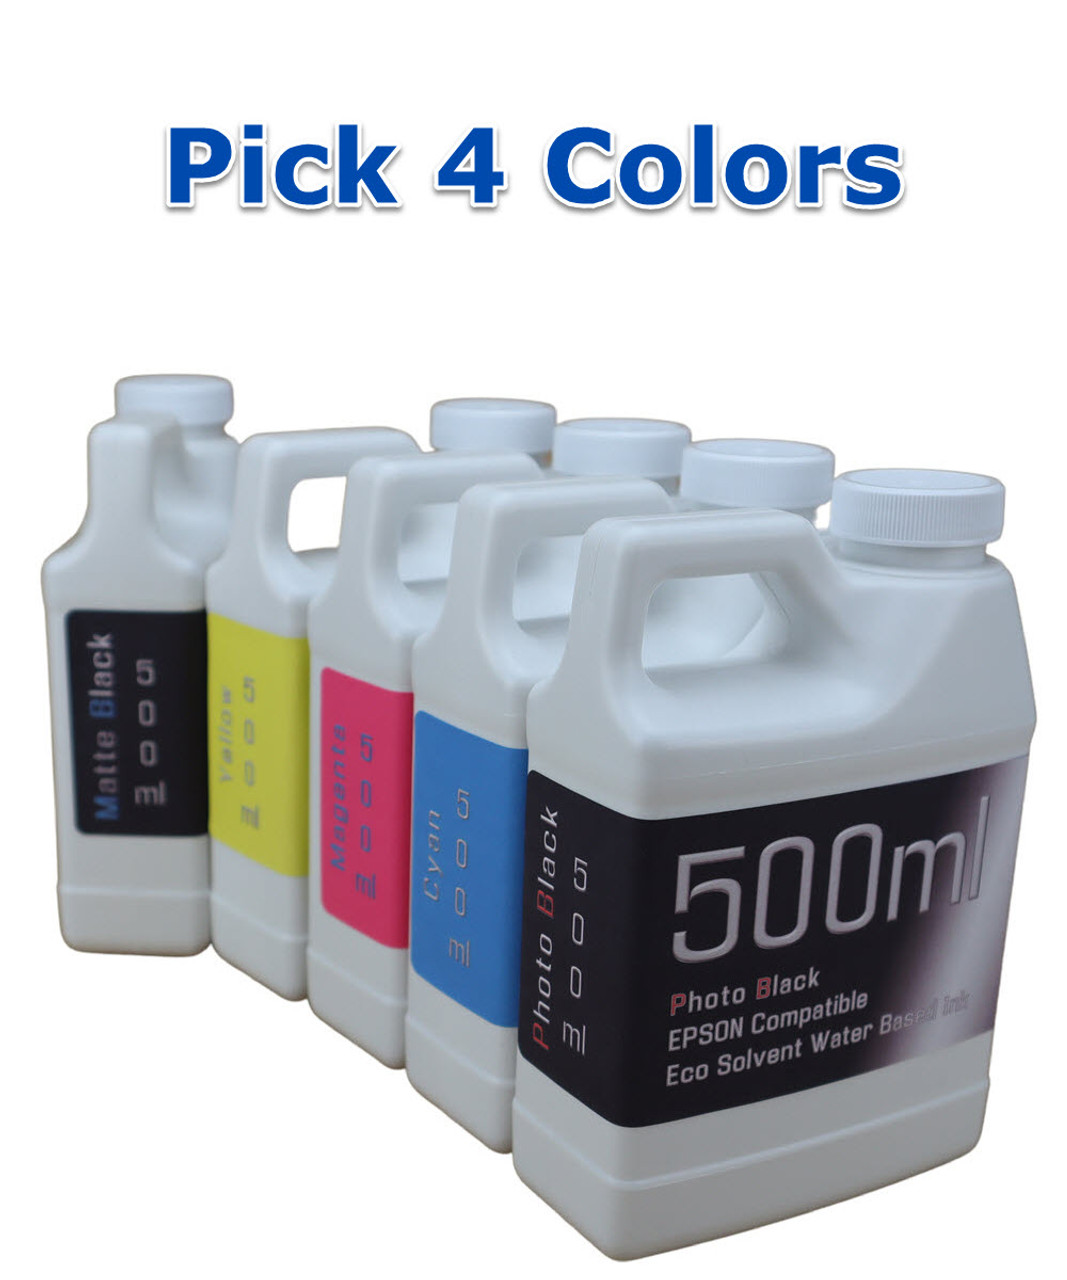 Pick 4 Colors Water Based Eco Solvent Ink 500ml Bottles for Epson SureColor T3270 T5270 T7270 Printers